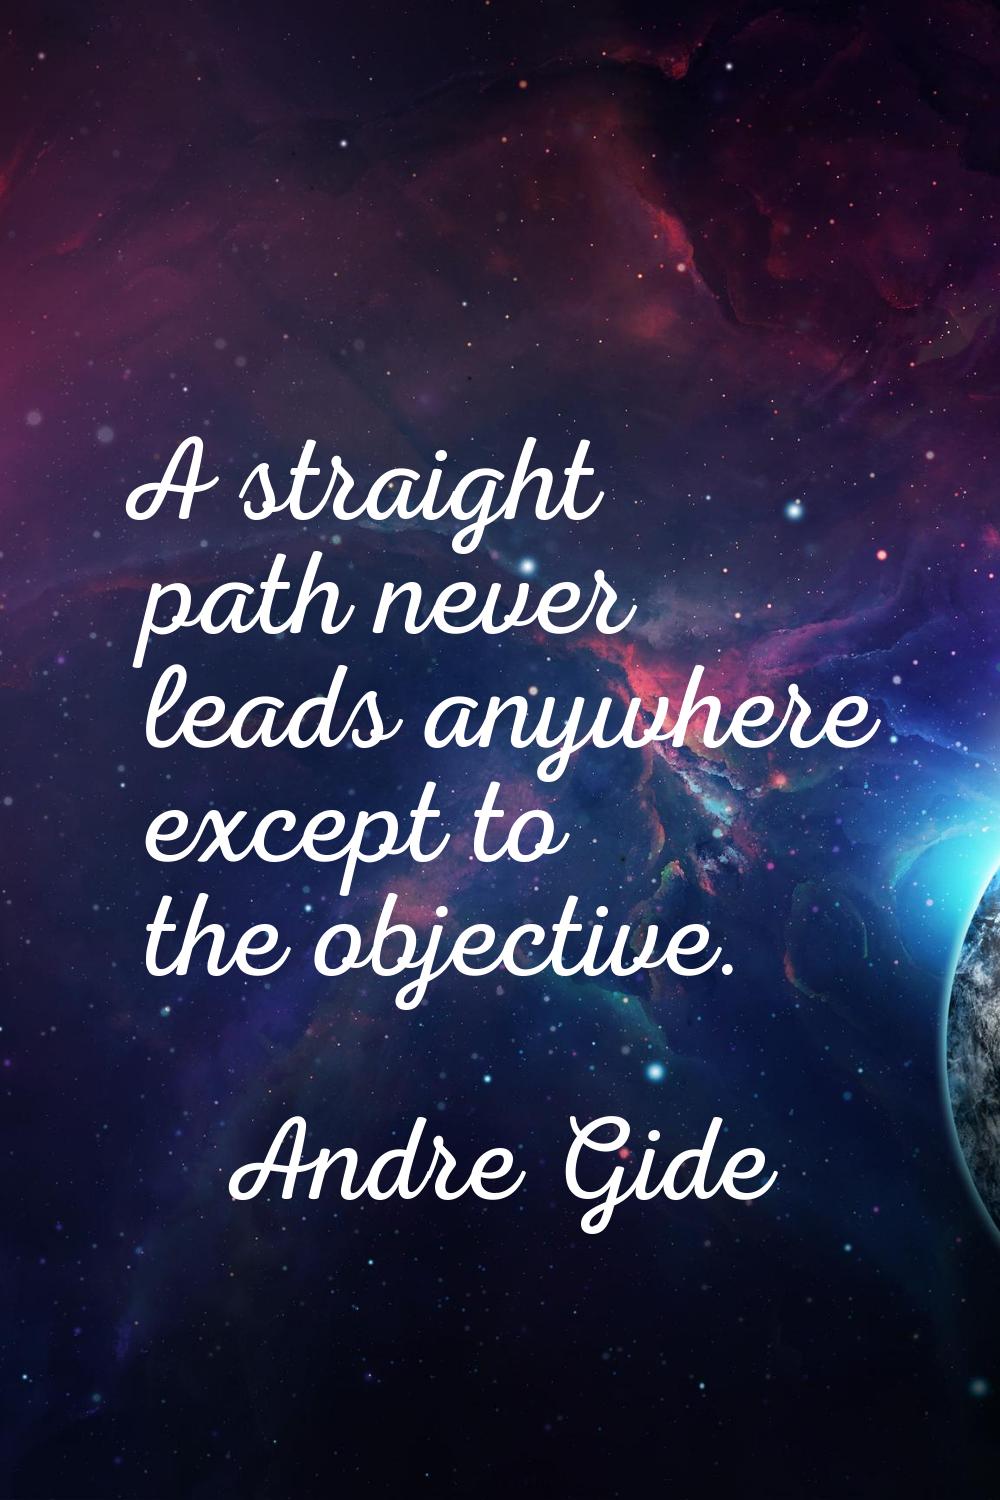 A straight path never leads anywhere except to the objective.